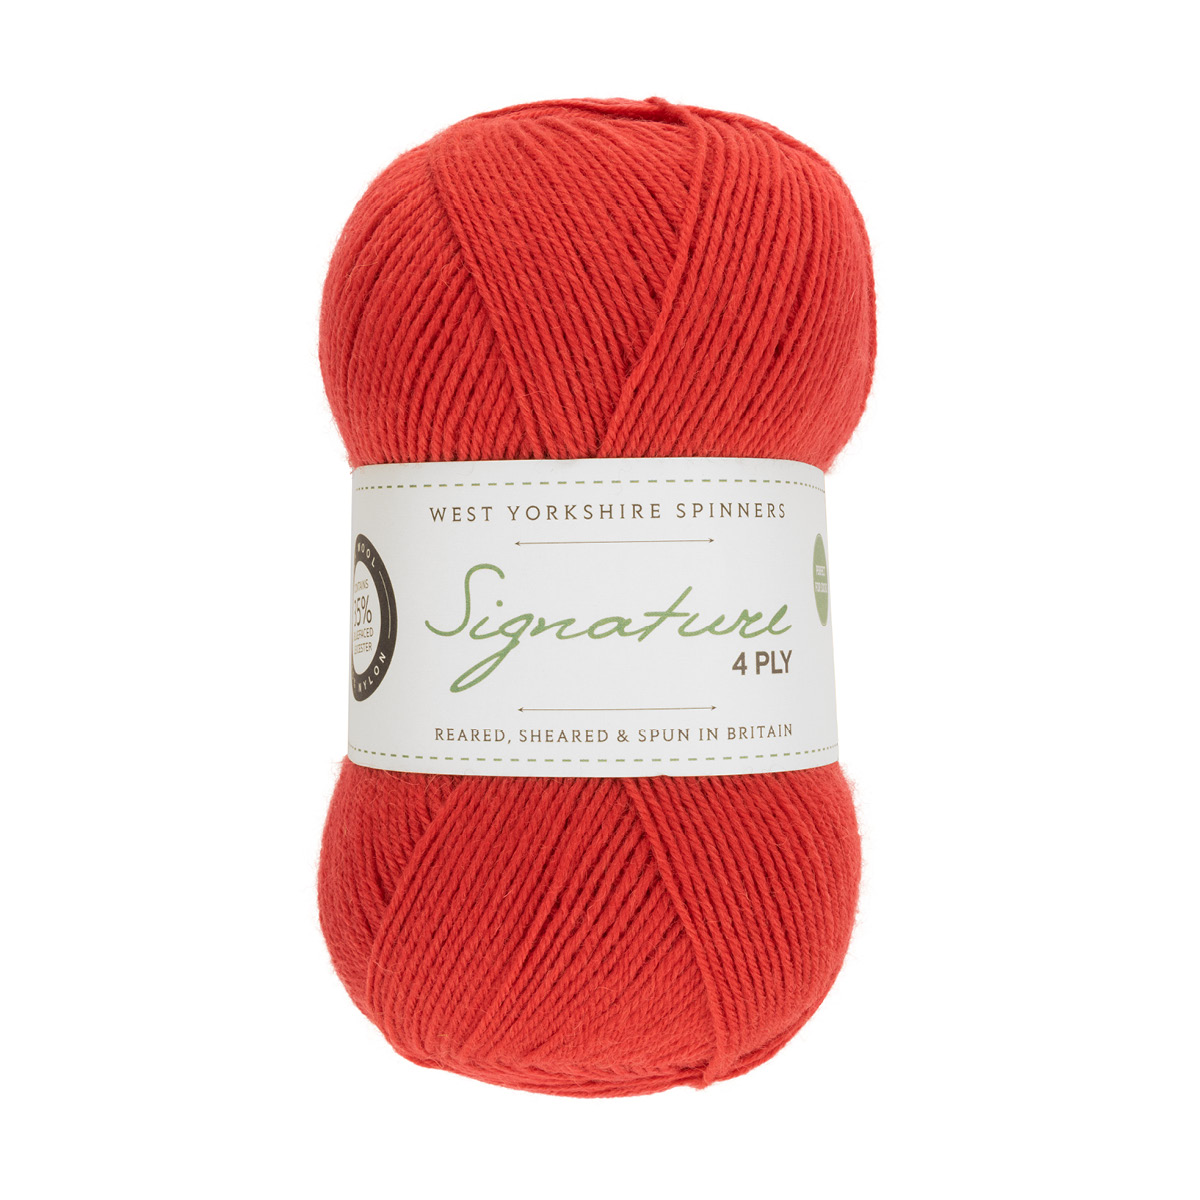 Signature 4ply - 510 Cayenne Pepper